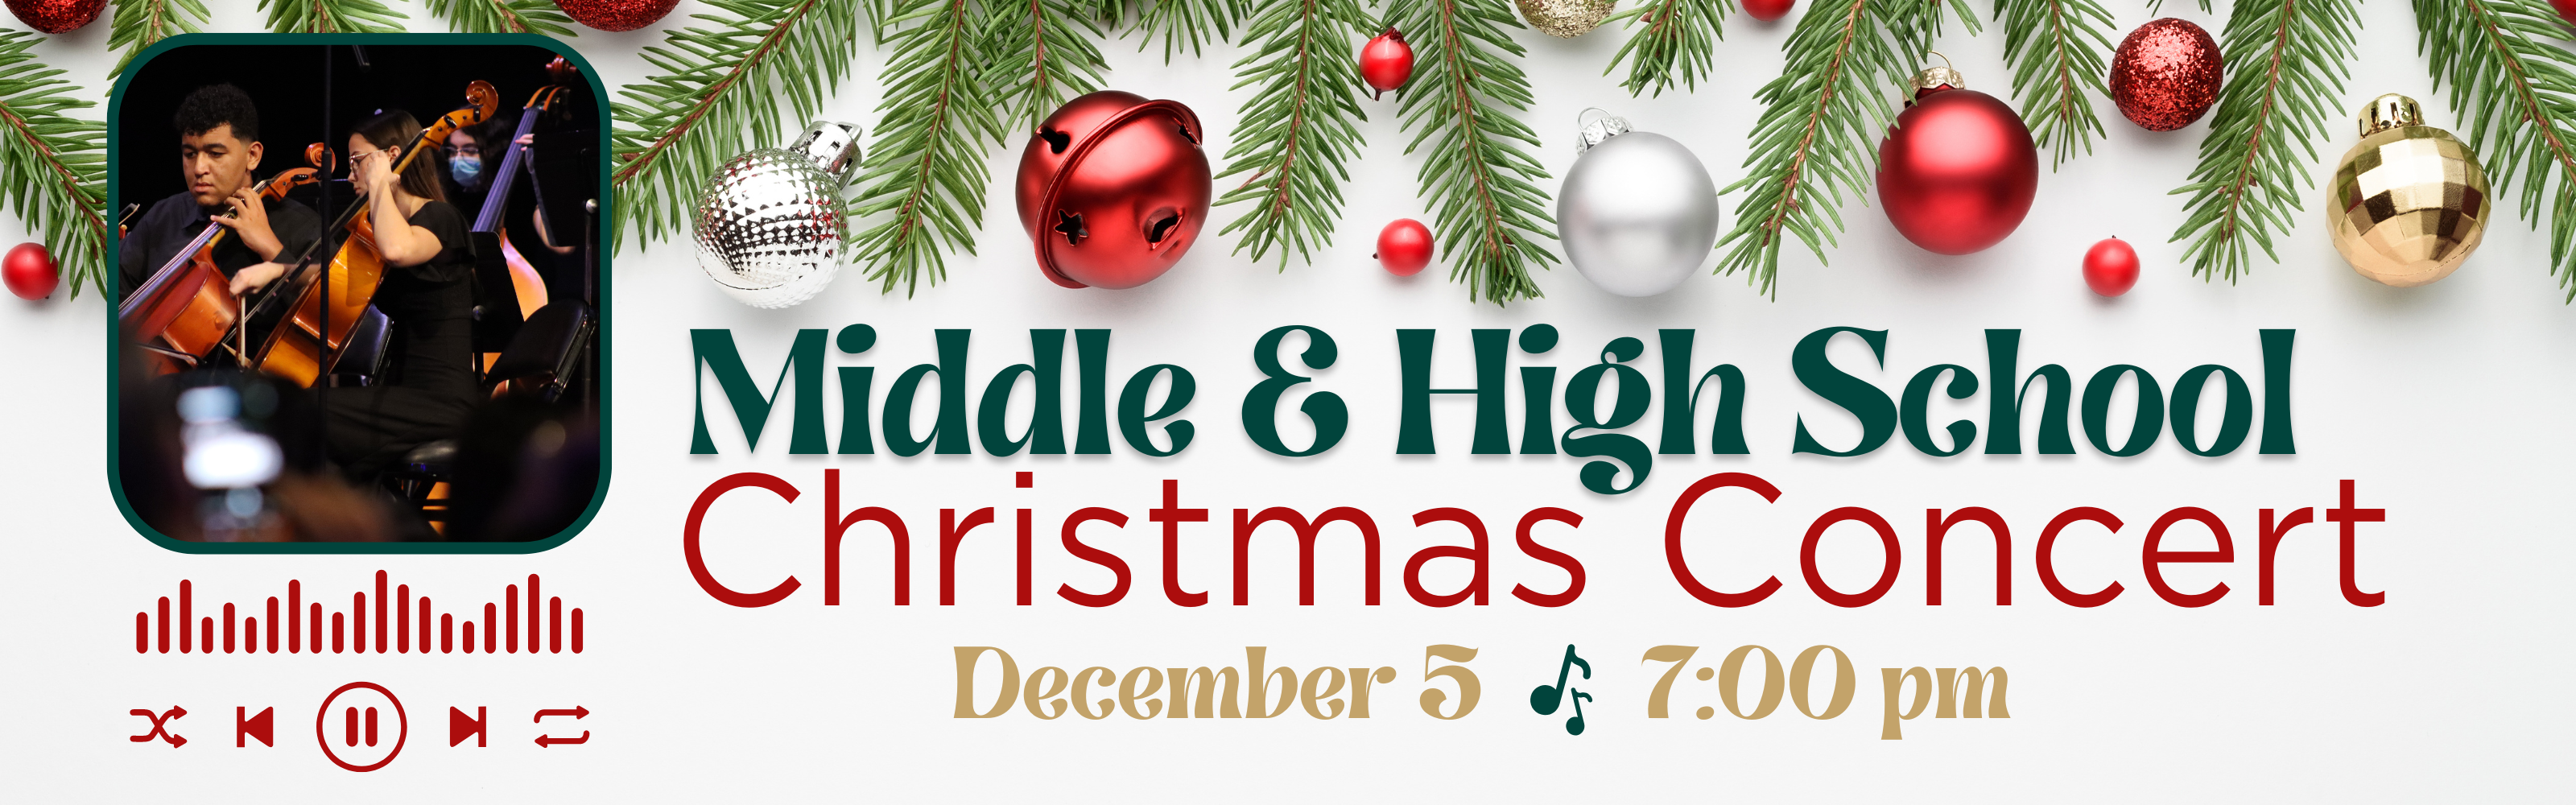 middle and high school Christmas concert December 5